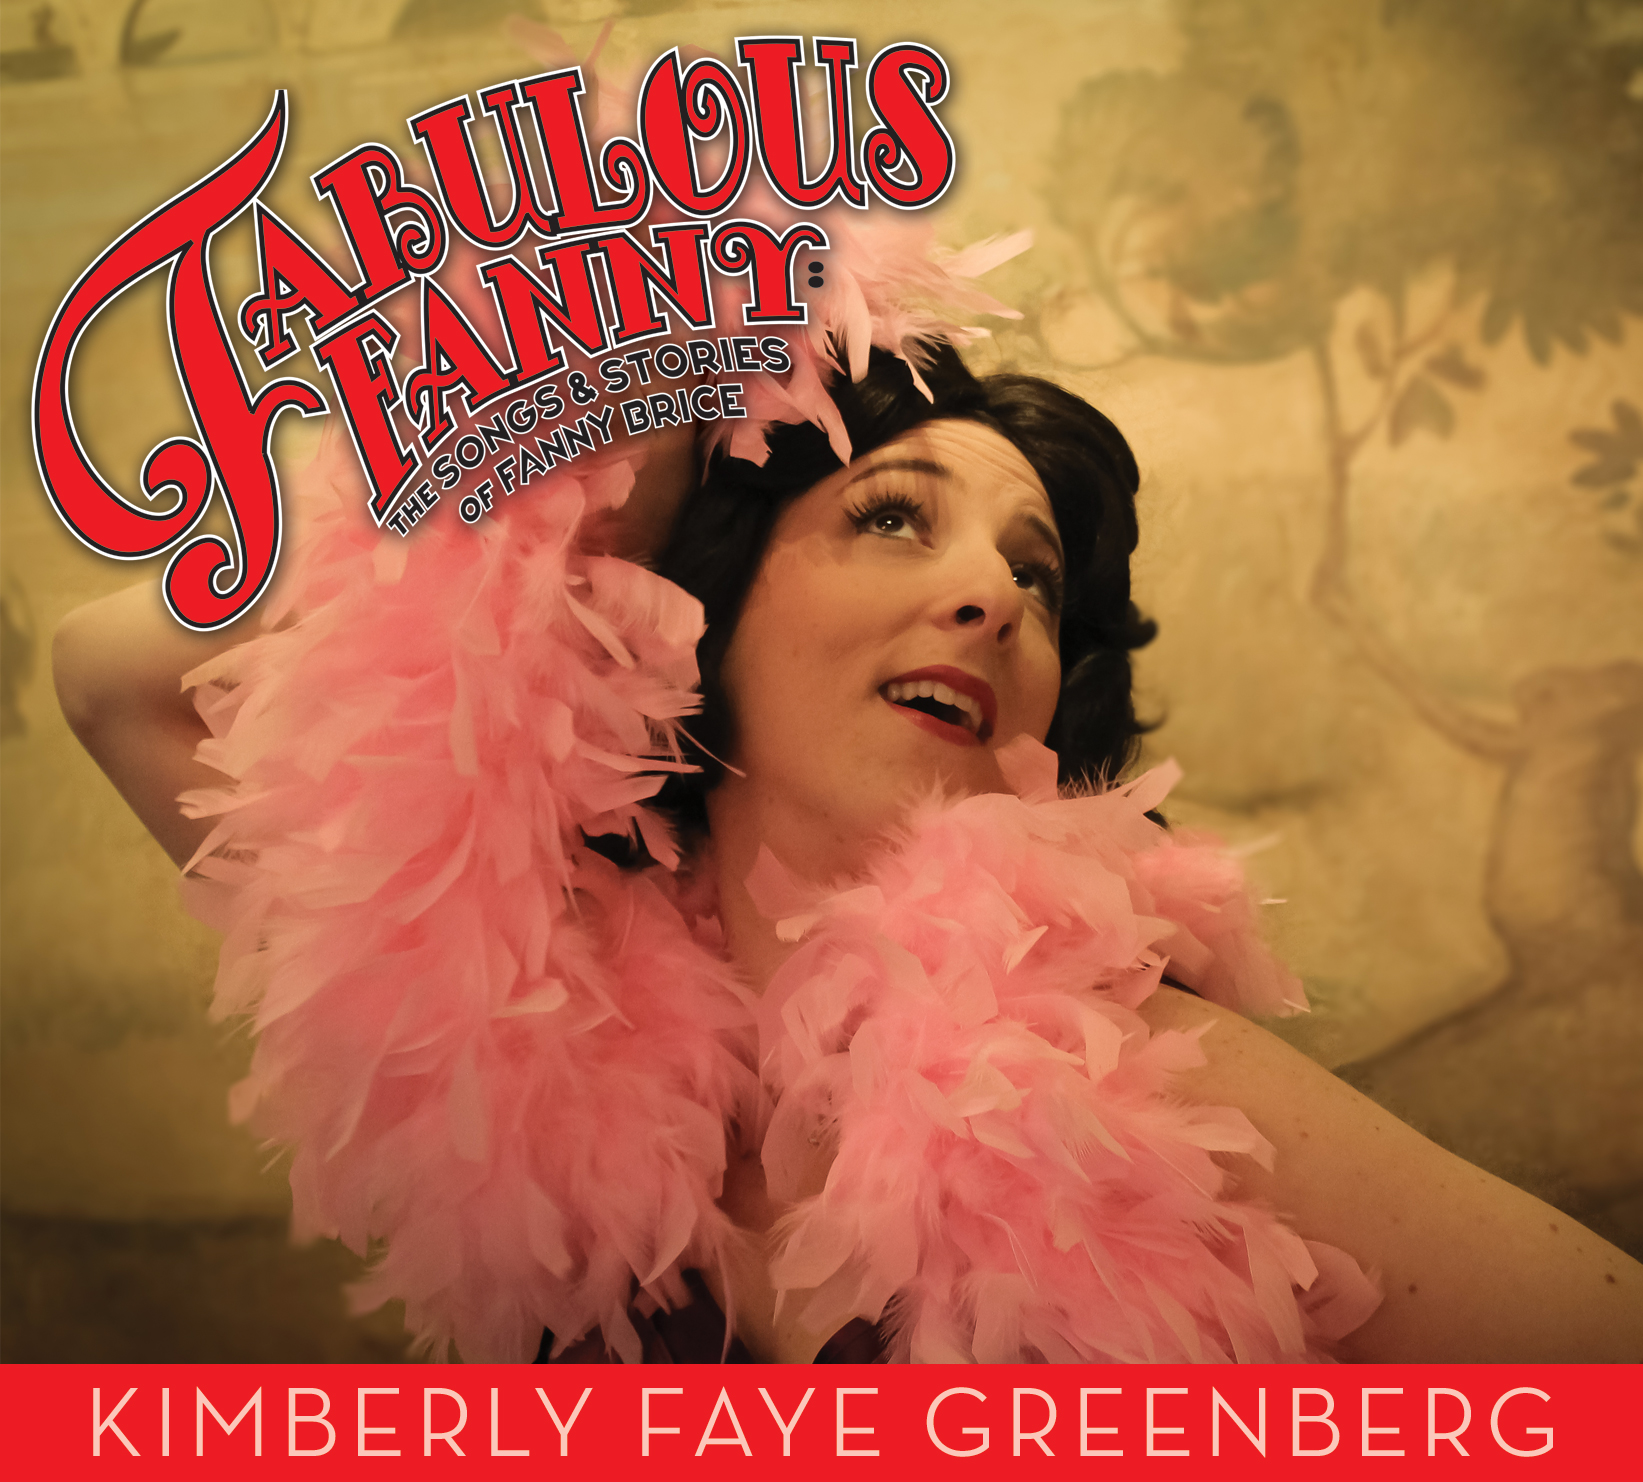 Stream the FABULOUS FANNY: THE SONGS AND STORIES OF FANNY BRICE On Sunday, February 20th 